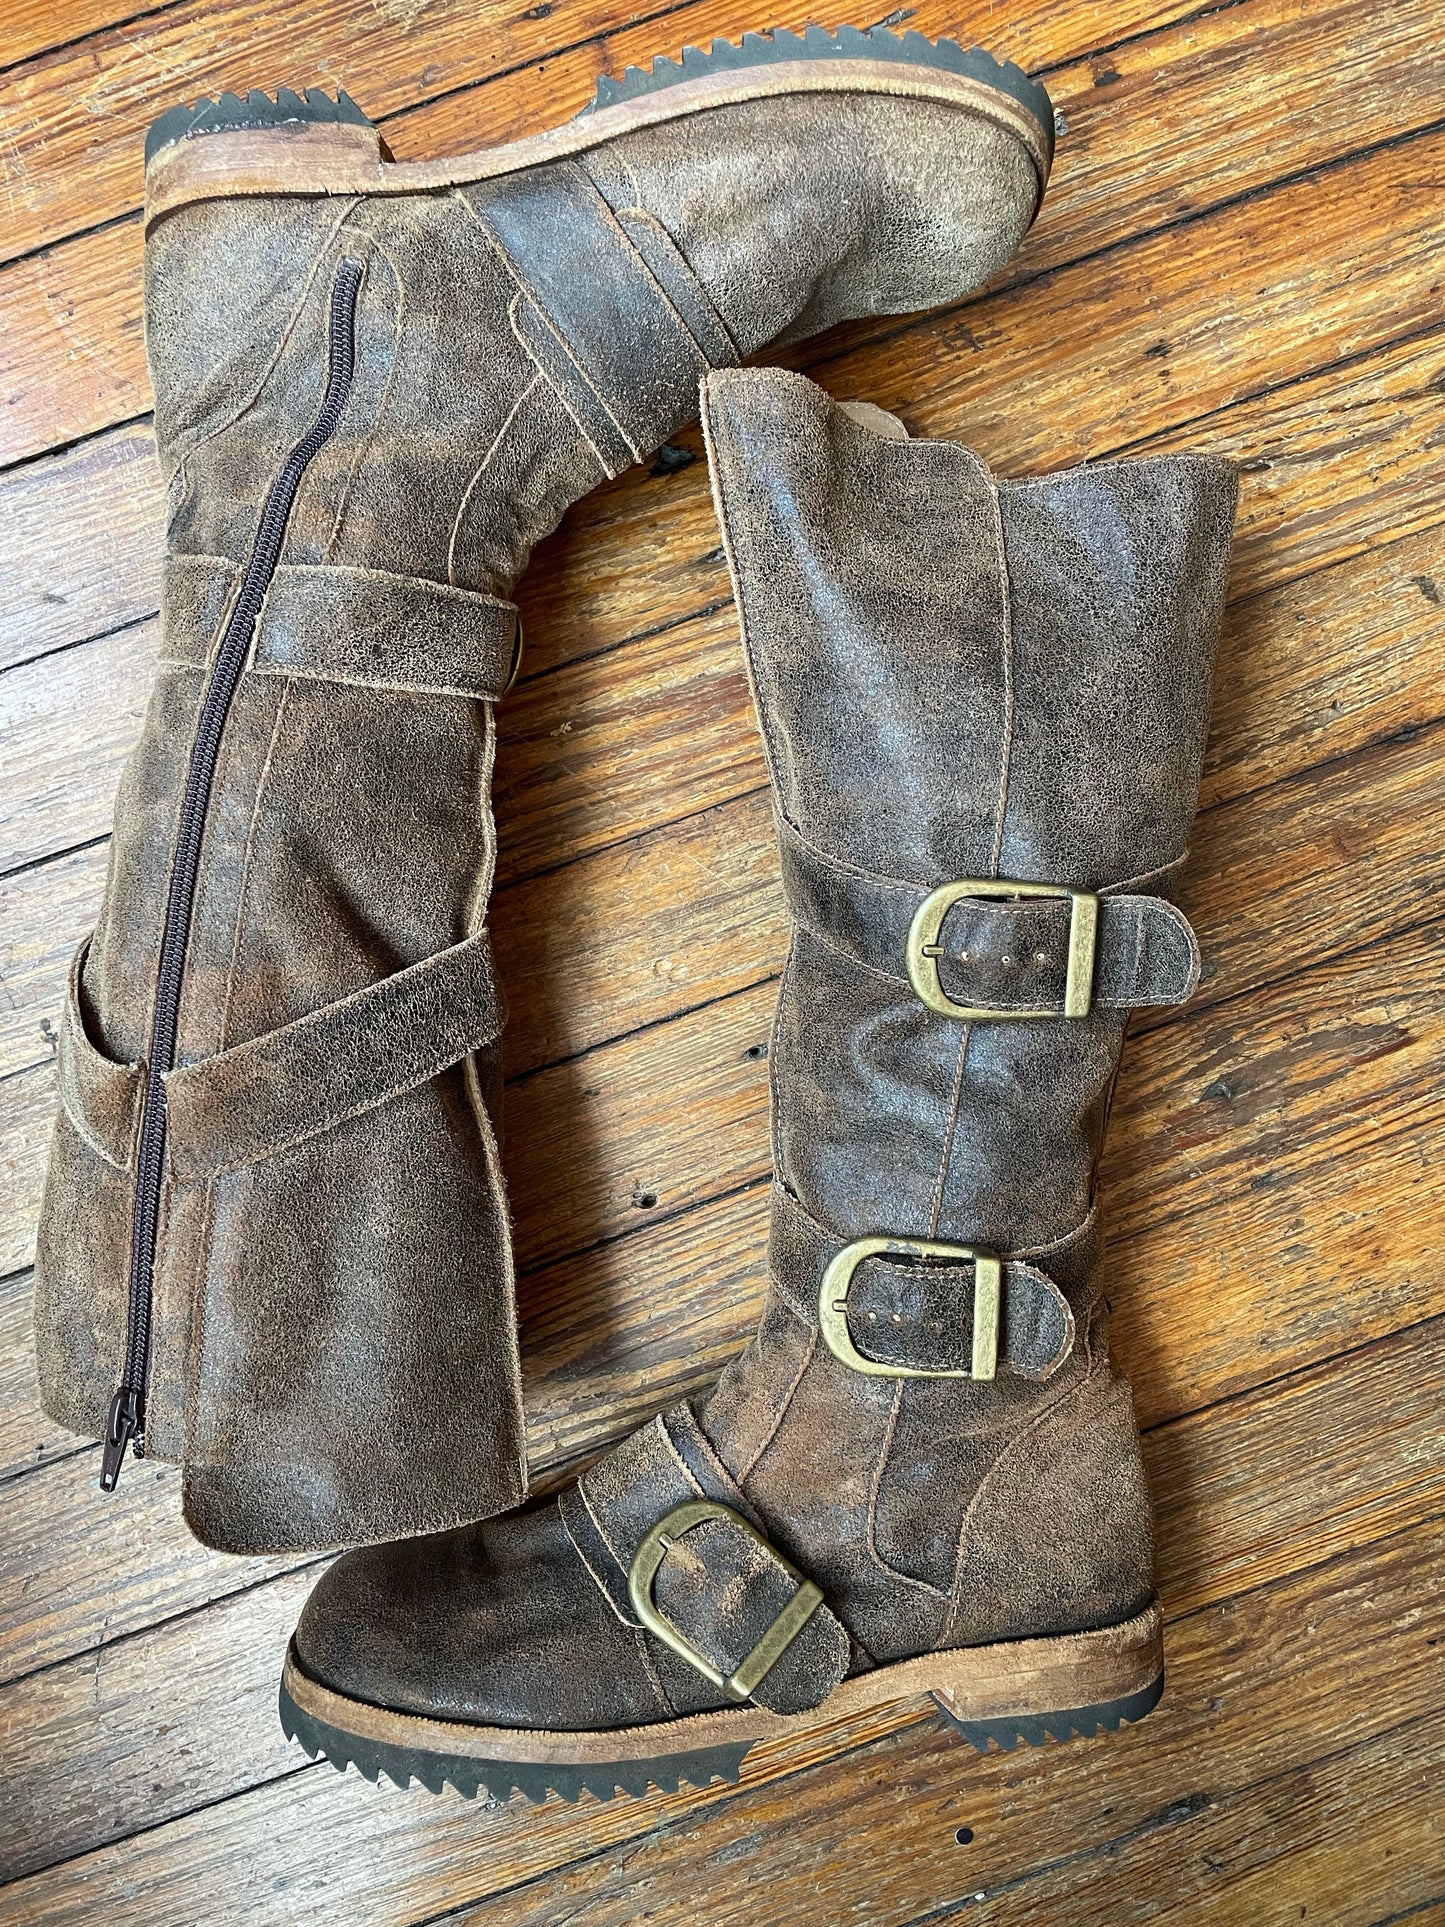 Woodland Realm Leather Boots Made by Jim Barnier